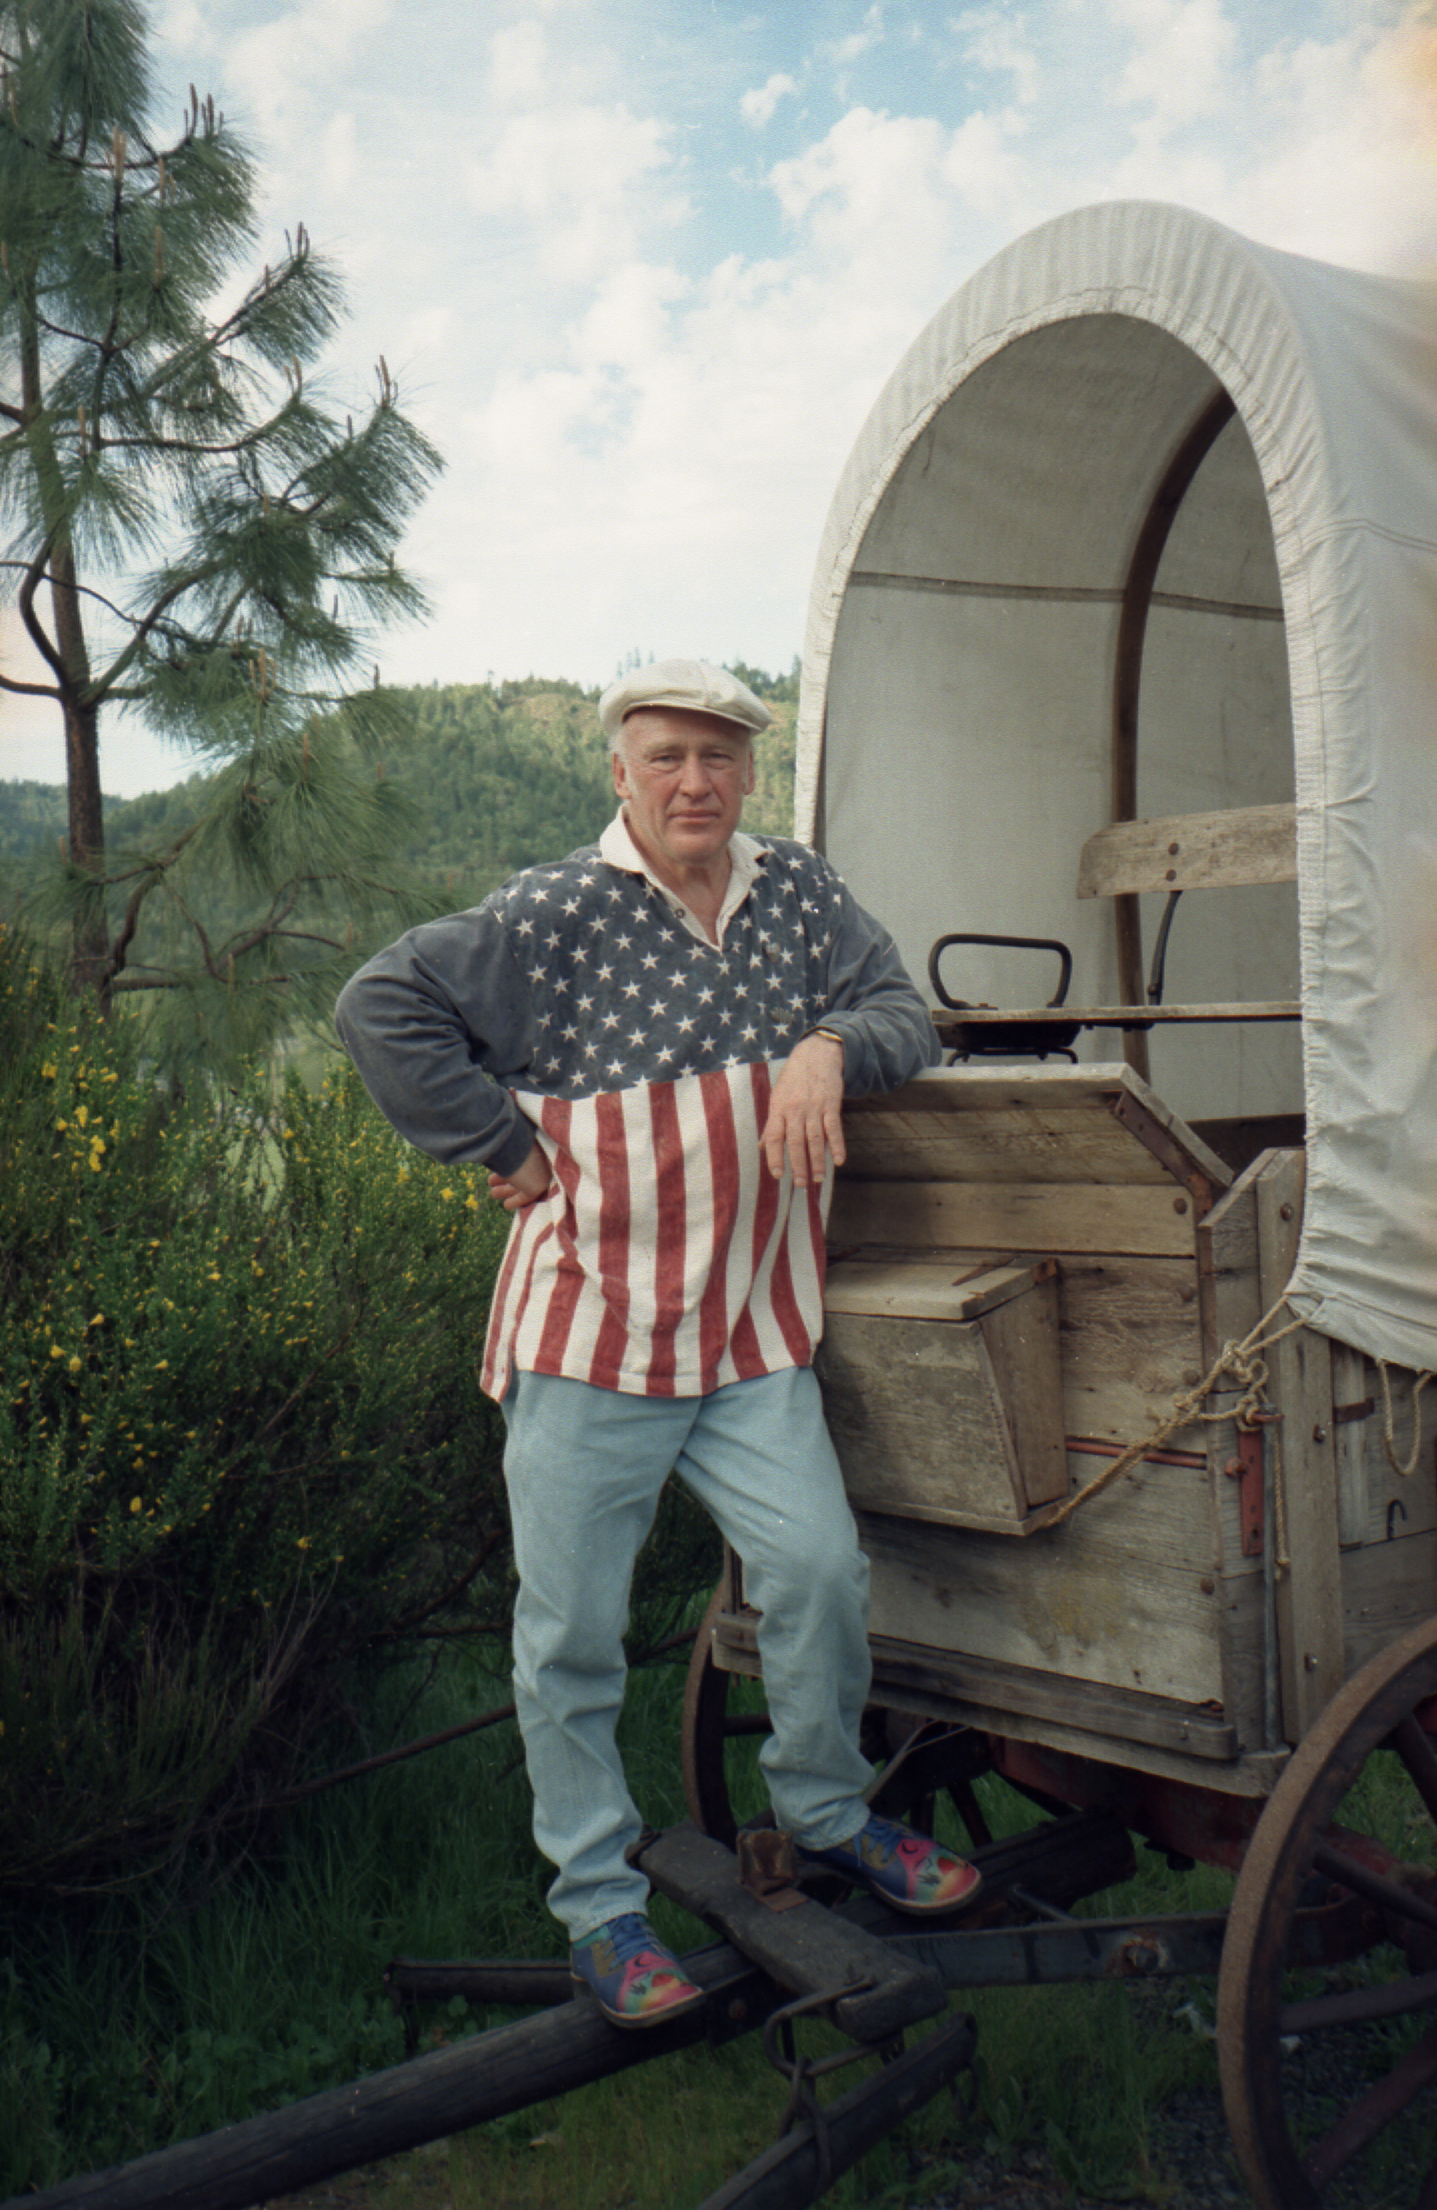 Photo of a man standing on the front hitch of a wooden covered wagon that is outdoors, surrounded by green shrubs and trees. He is wearing brightly colored shoes, blue jeans, and a white flat cap. His casual, rugby-style shirt represents the American flag: the top half of the shirt is blue with white stars, while the bottom half is red and white vertical stripes, and the collar is white. He is leaning his left elbow on the wagon and he is looking at the camera.